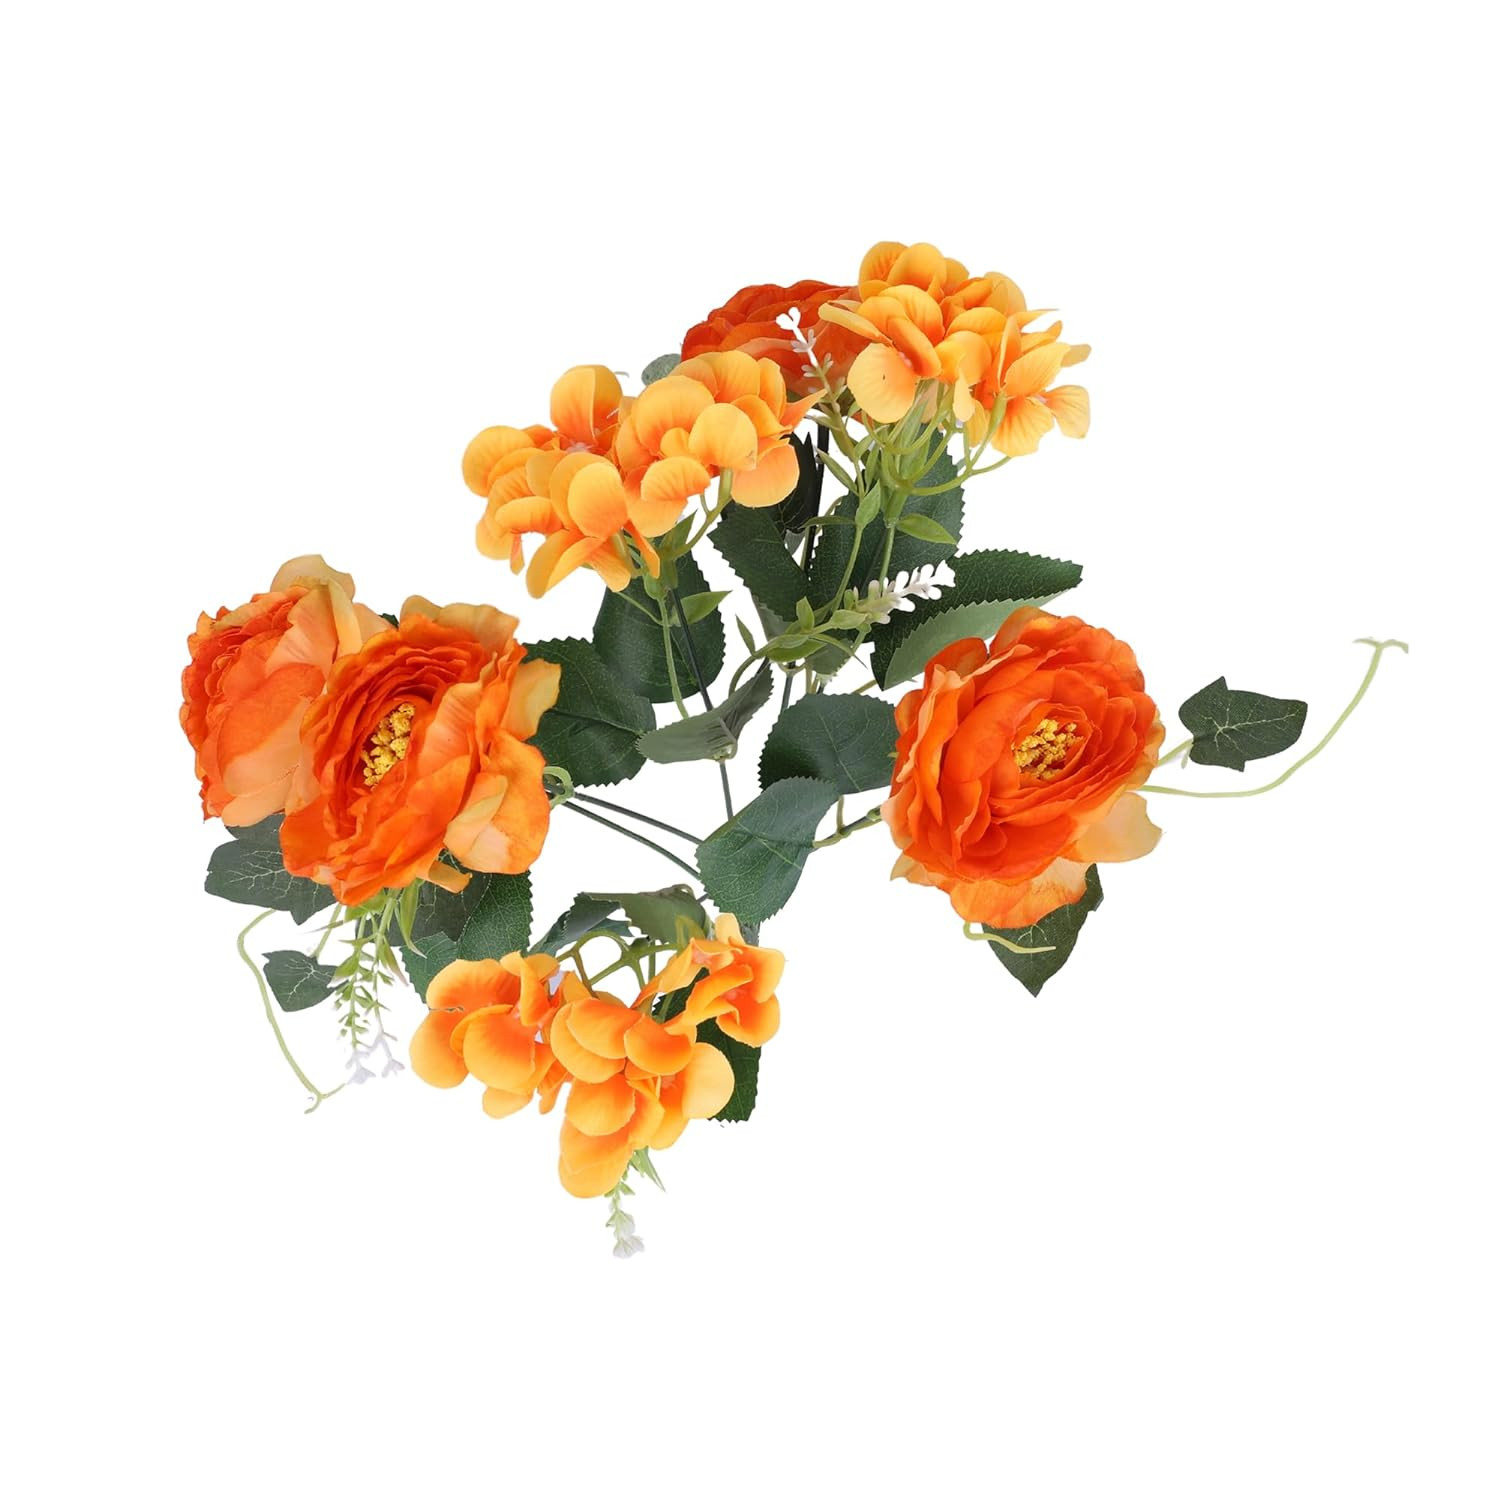 Kuber Industries Artificial Flowers for Home DÃ©cor|Natural Looking Indoor Fake Flowers for Vase|Artificial Flowers for Decoration|Without Basket (Orange)